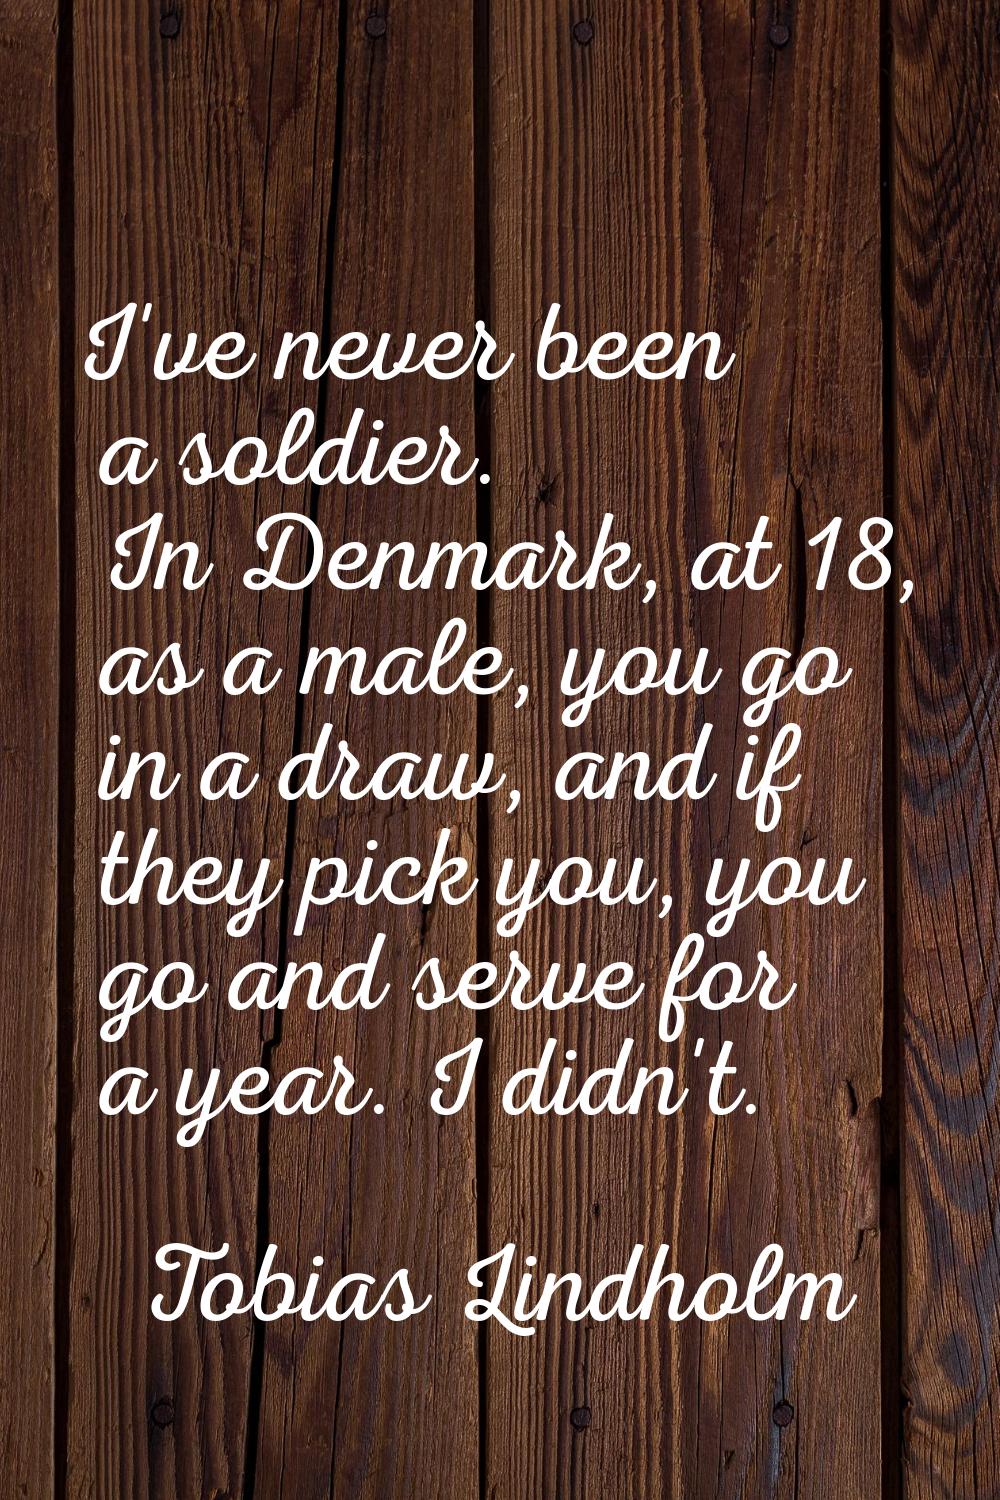 I've never been a soldier. In Denmark, at 18, as a male, you go in a draw, and if they pick you, yo